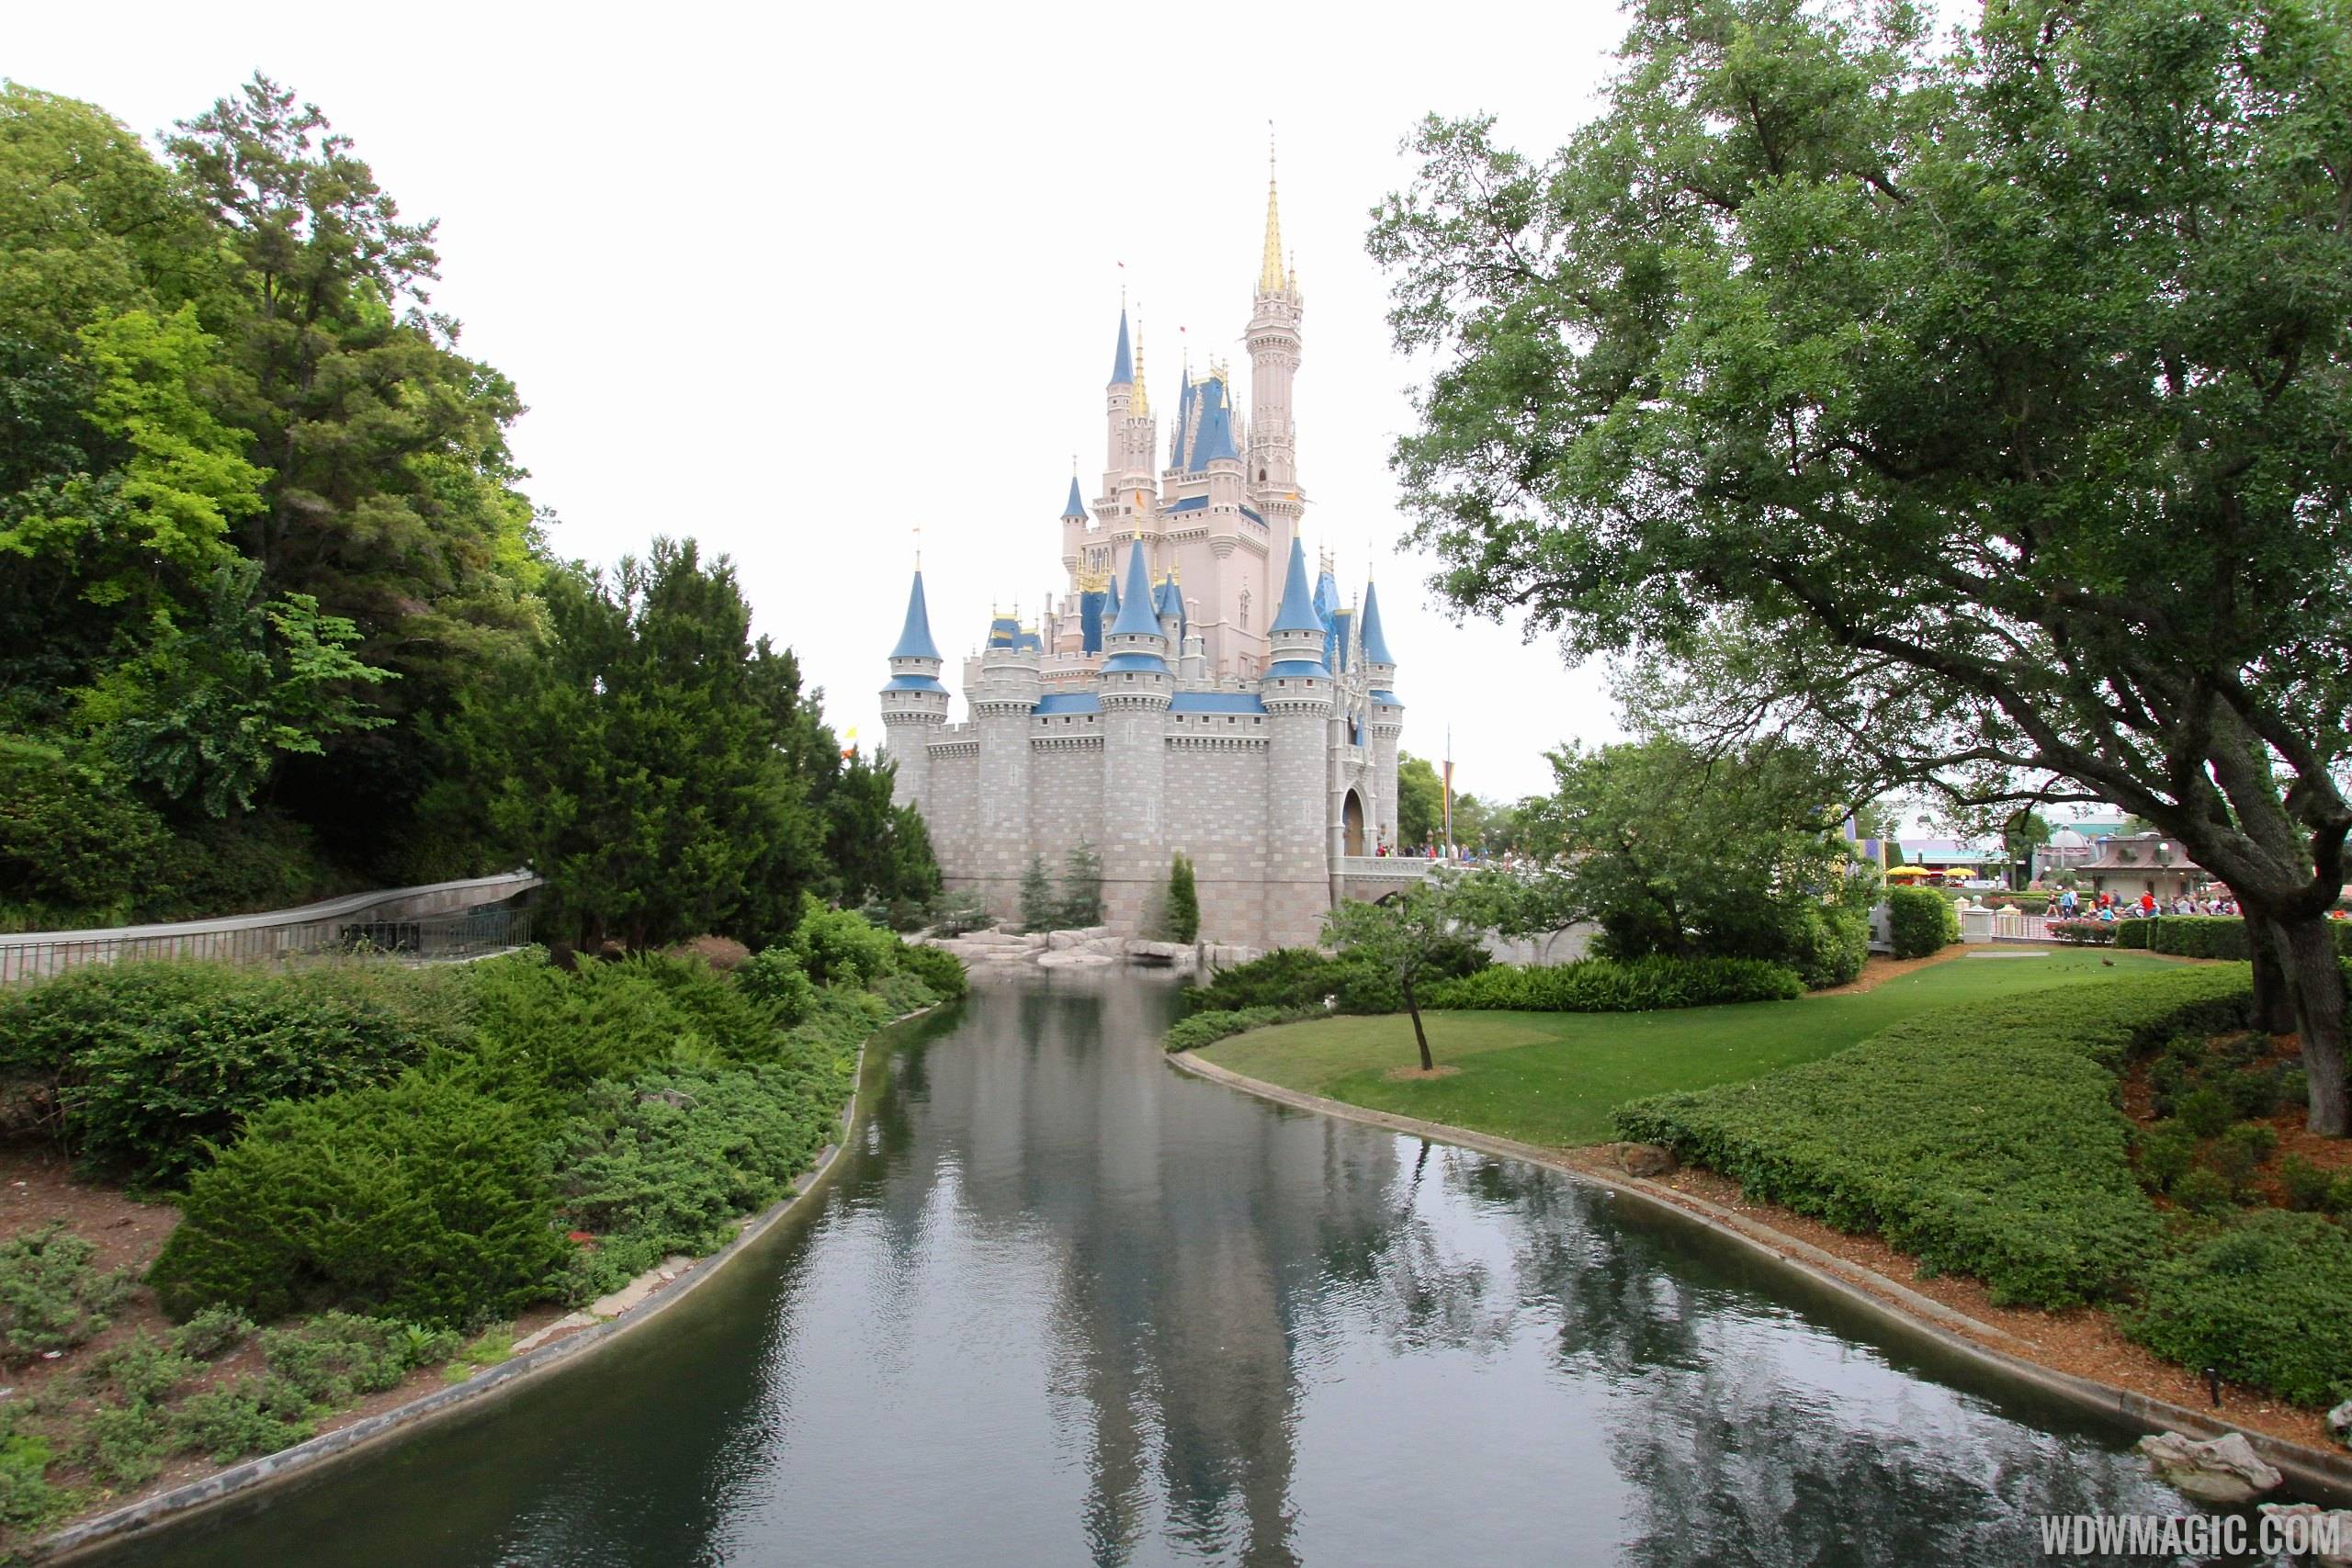 PHOTOS - Water returns to the Magic Kingdom's waterways and castle moat